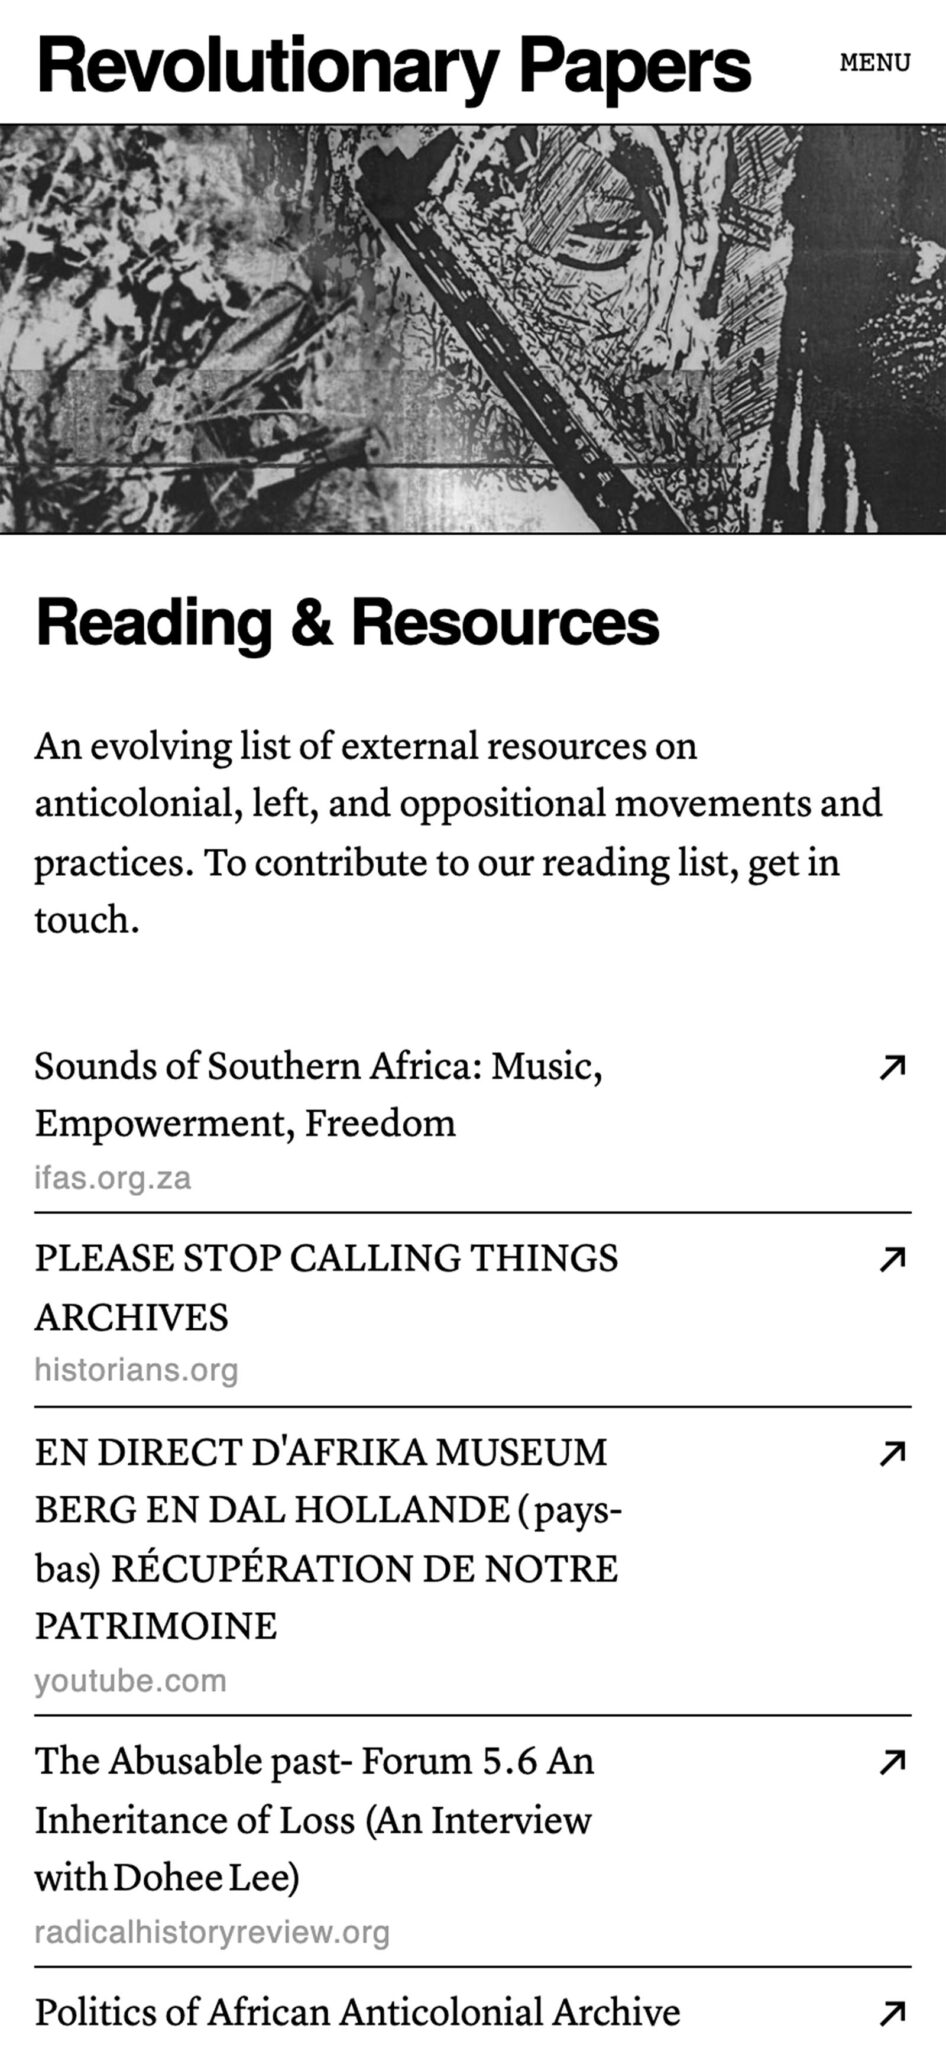 Revolutionary Papers reading and resources page